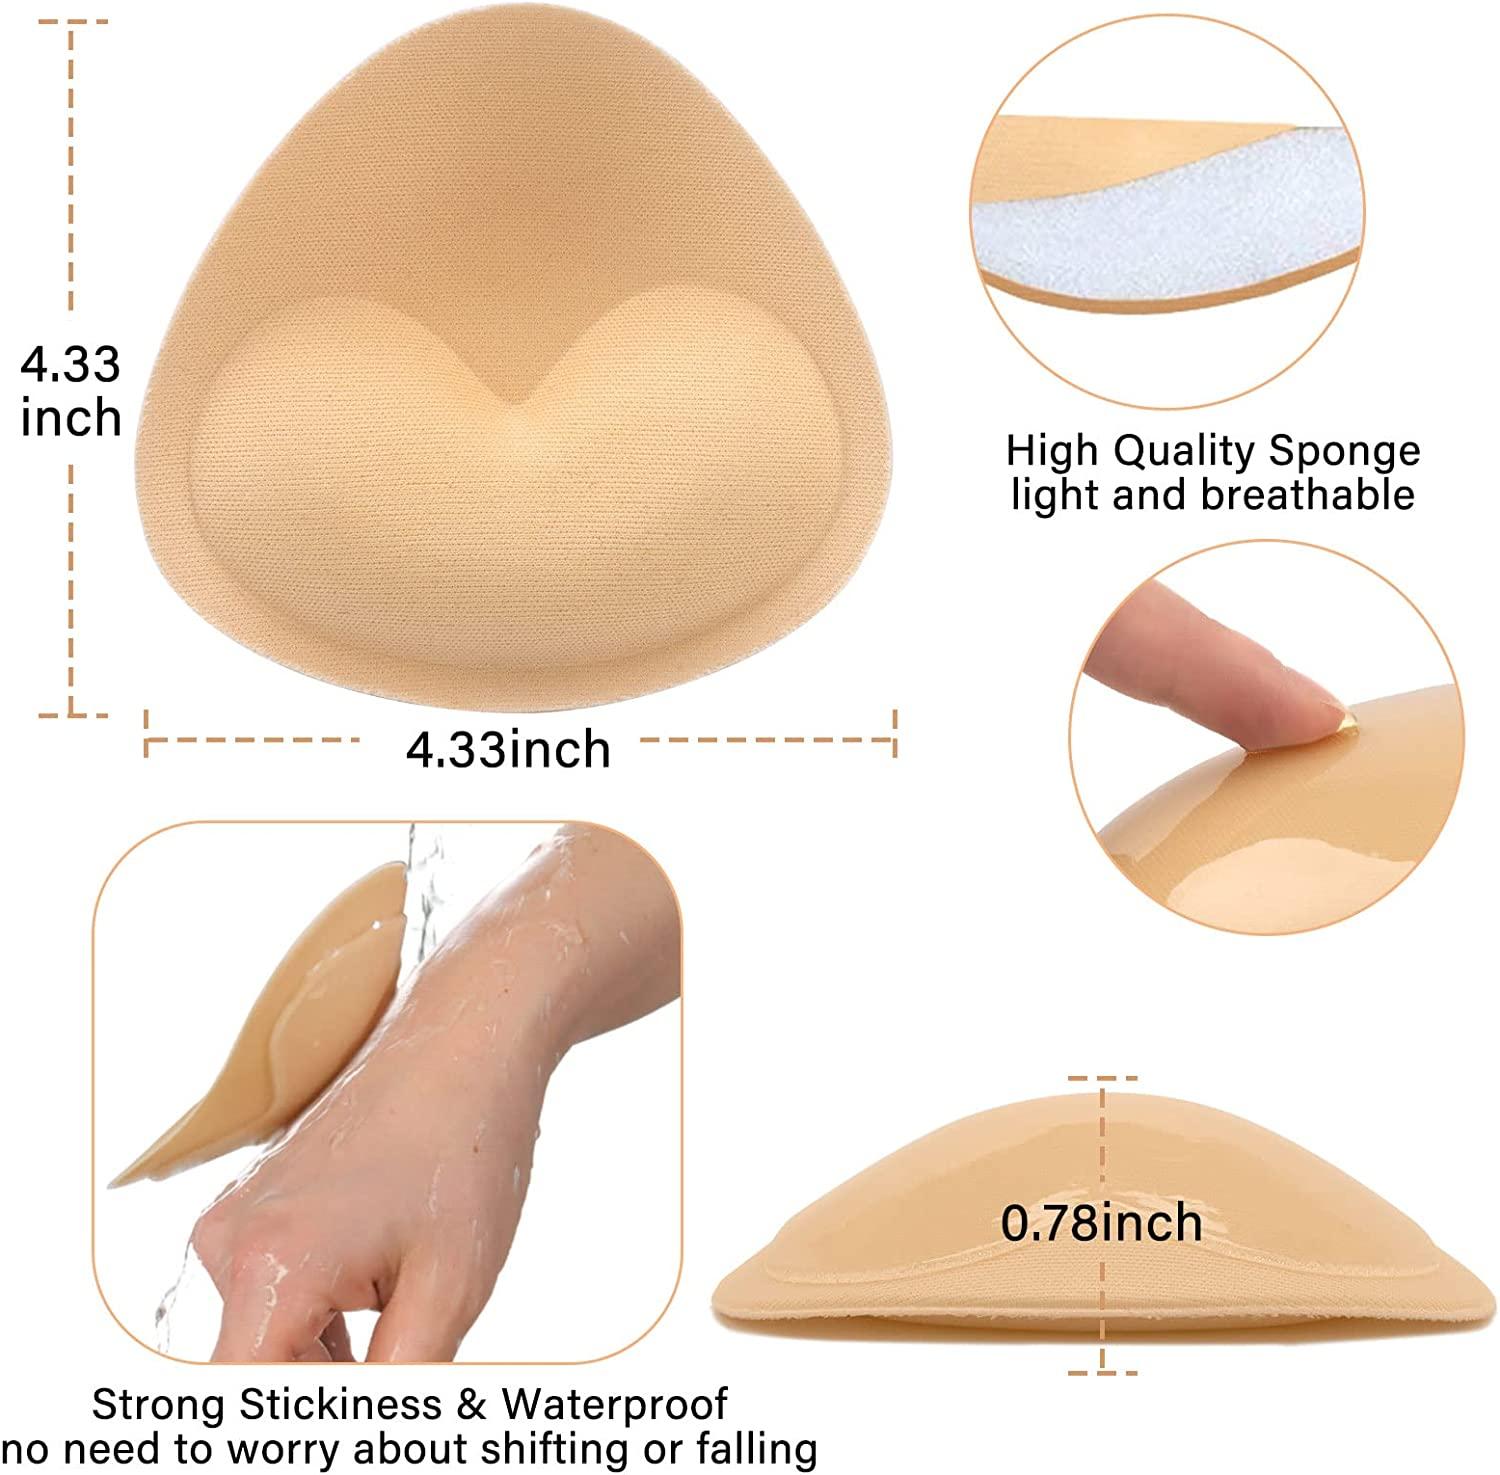 3 Pairs Silicone Bra Inserts Lift Breast Pads Breathable Push up